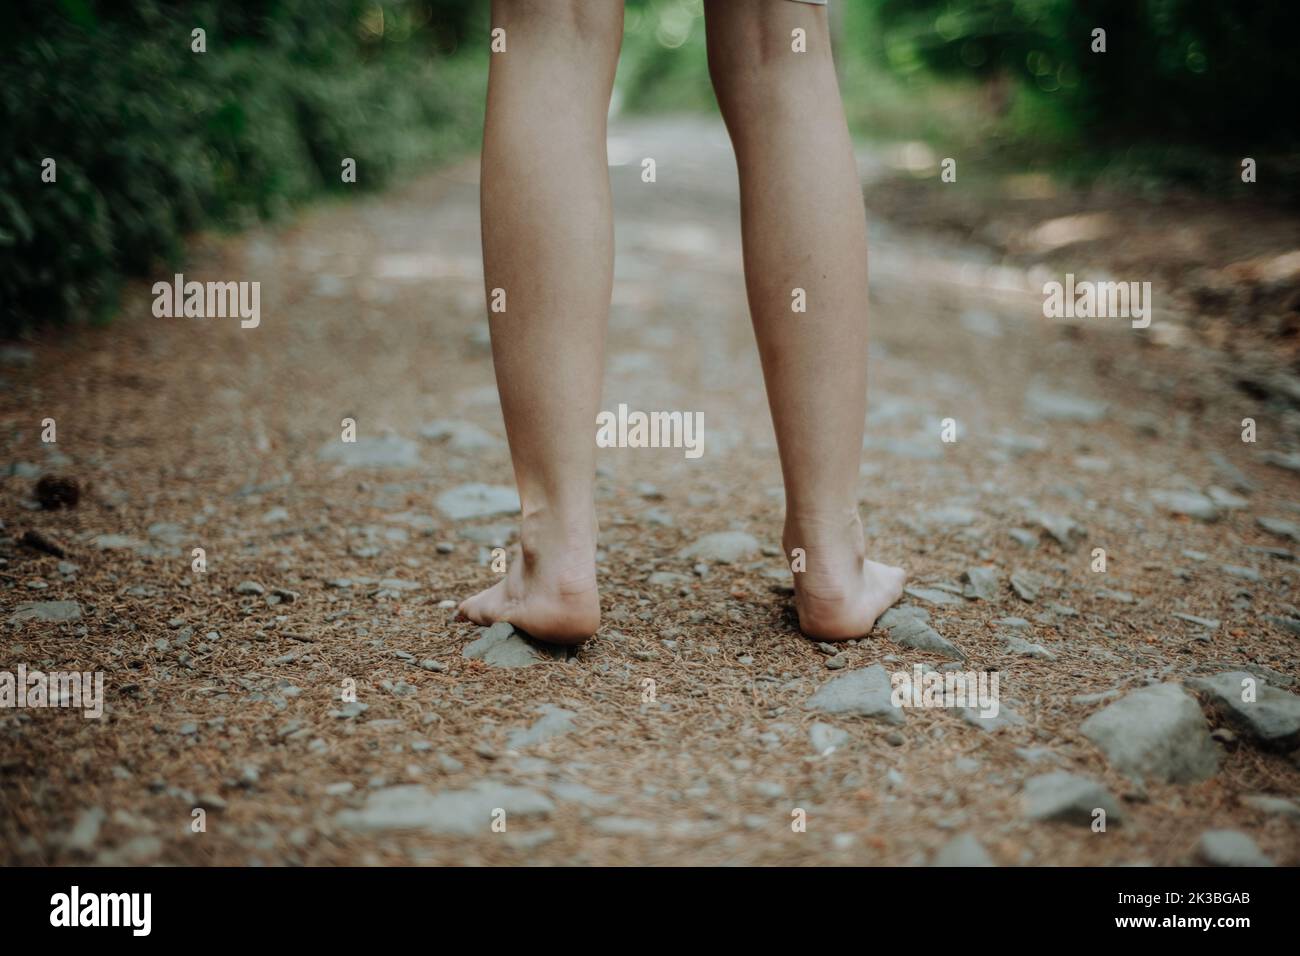 Rear view of barefoot legs walking in forest. Concept of healthy feet. Stock Photo